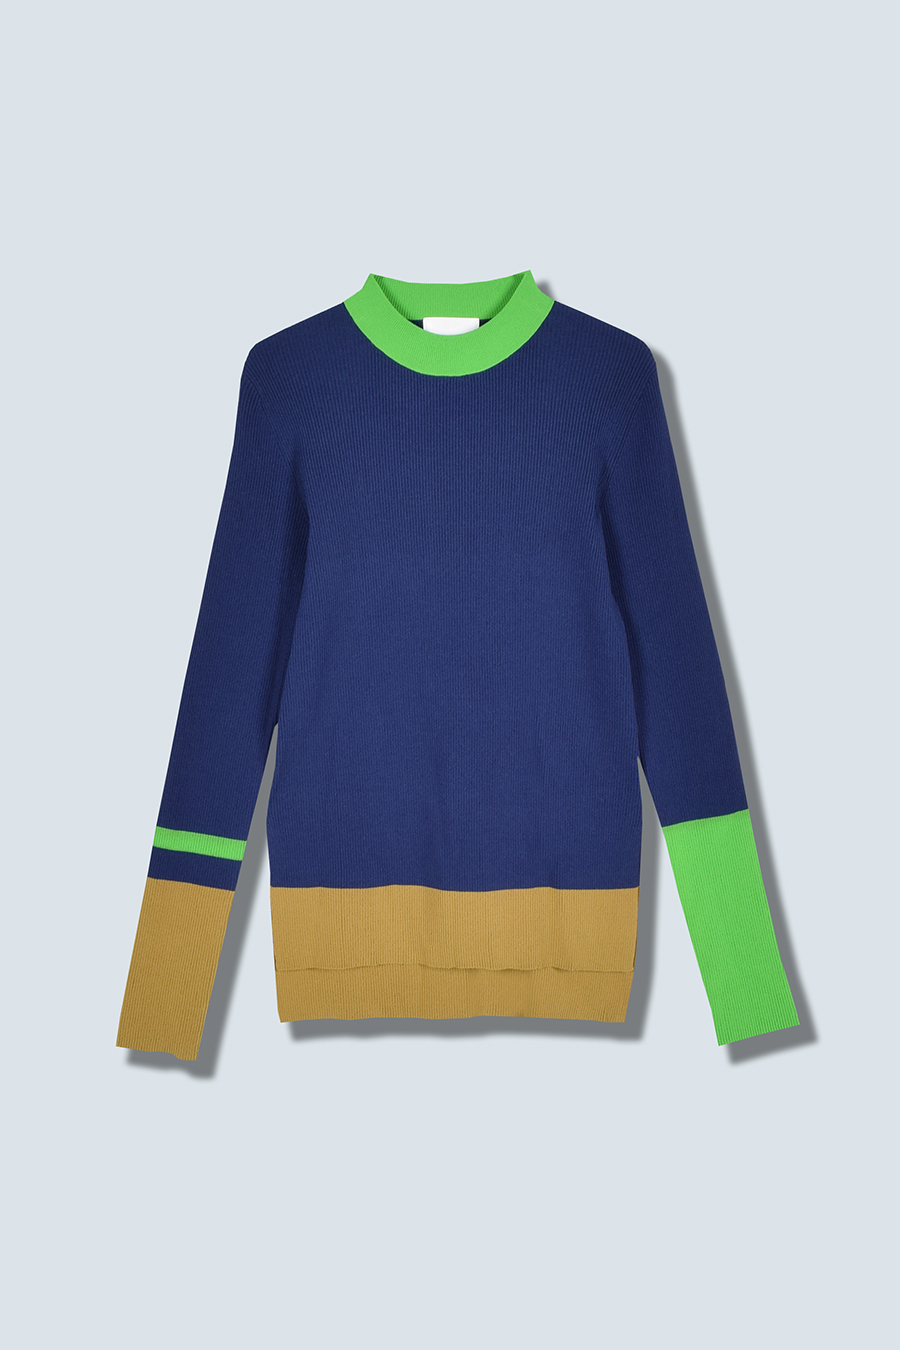 OMMO ONLINE STORE / COLLAR BLOCK KNIT TOP